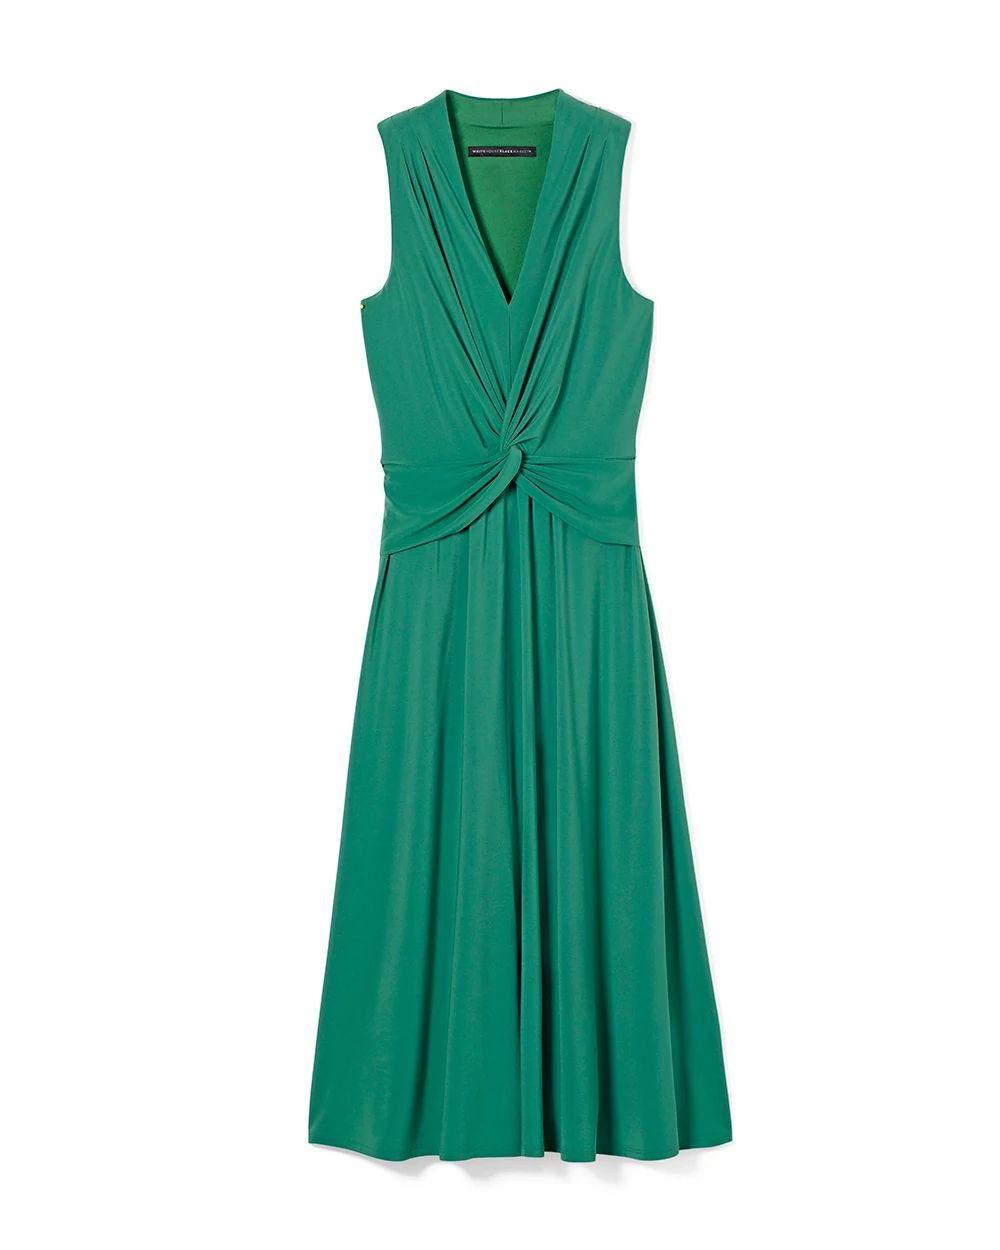 Sleeveless Matte Jersey Twist Front Dress click to view larger image.